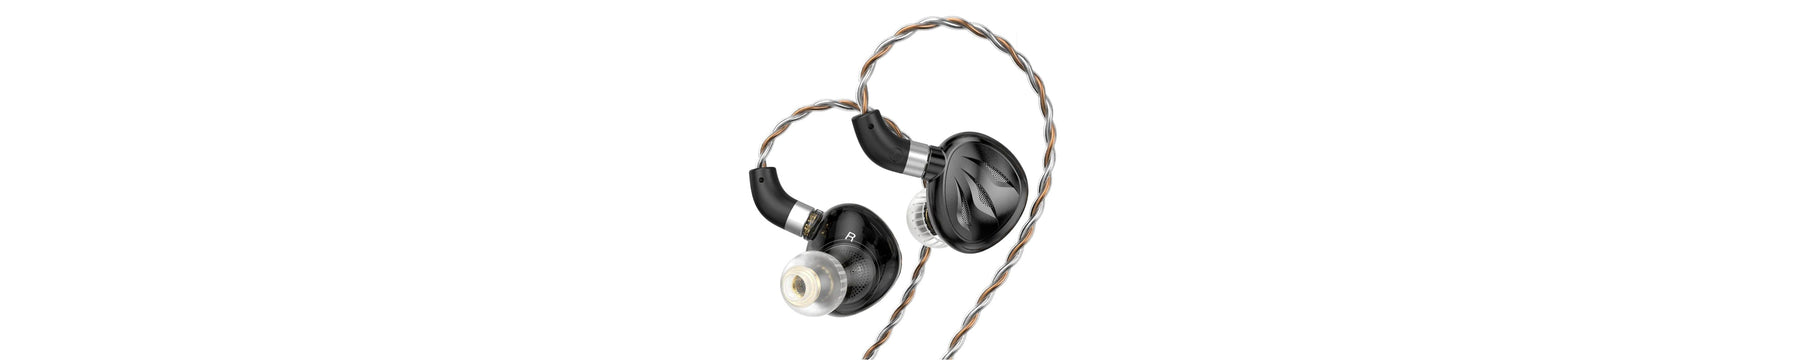 TRN Rosefinch: Brand New IEMs With 12mm Full-Frequency Planar Magnetic Driver